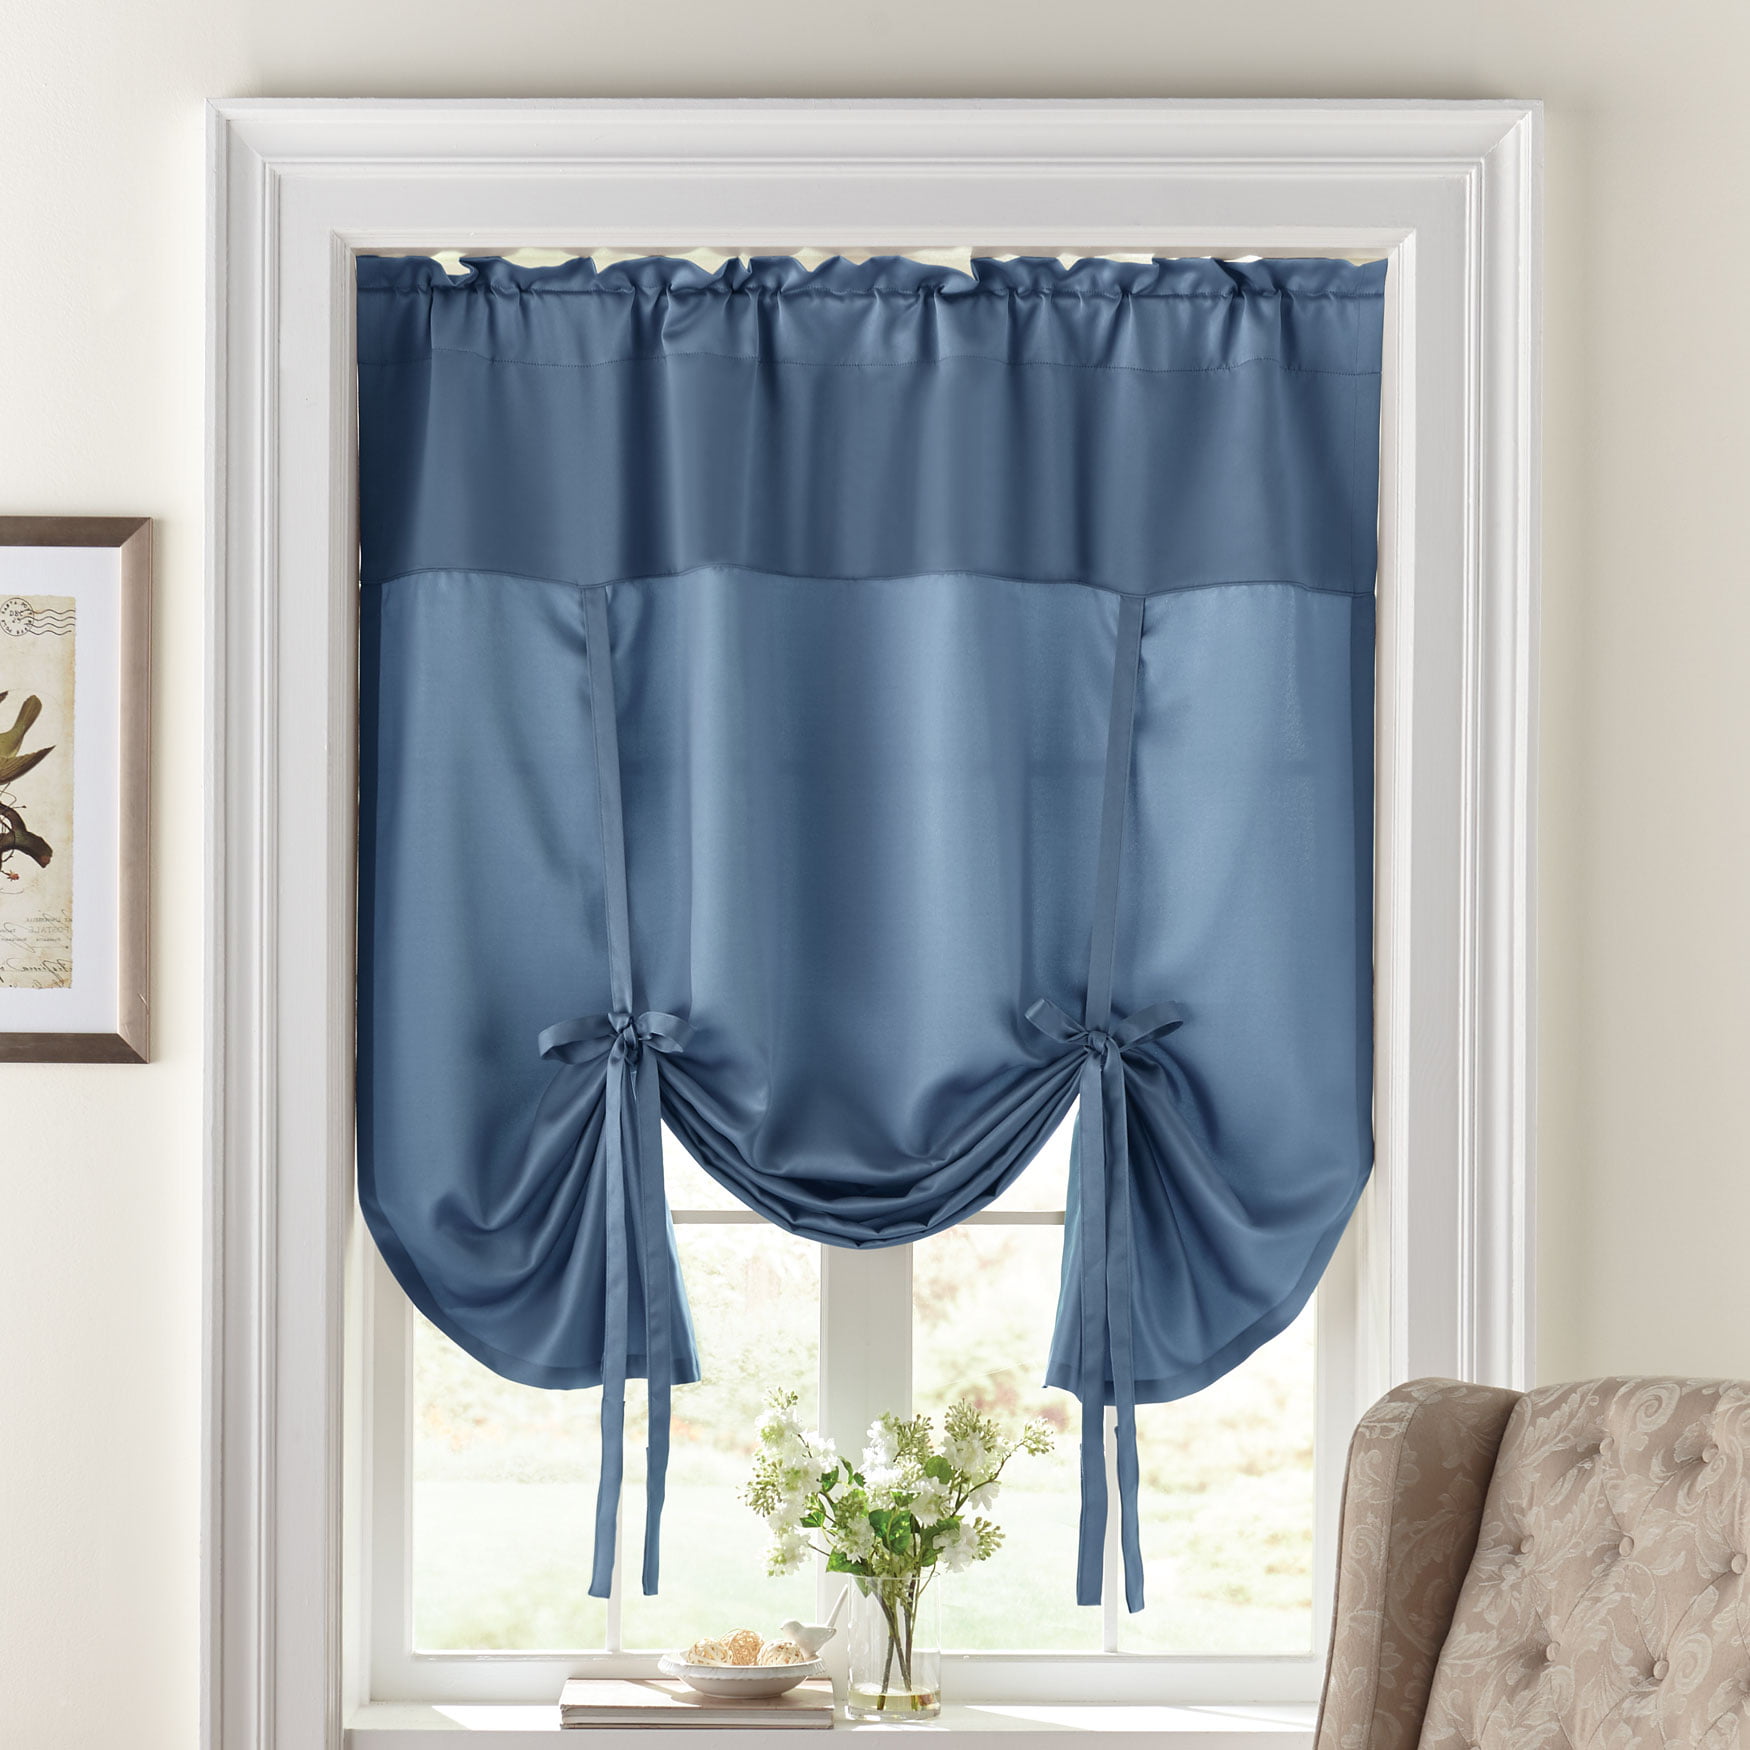 Deconovo Grommet Blackout Curtain Tie Up Shade Window Panels for Living Room and Bedroom Navy Blue 46W x 63 One Panel 